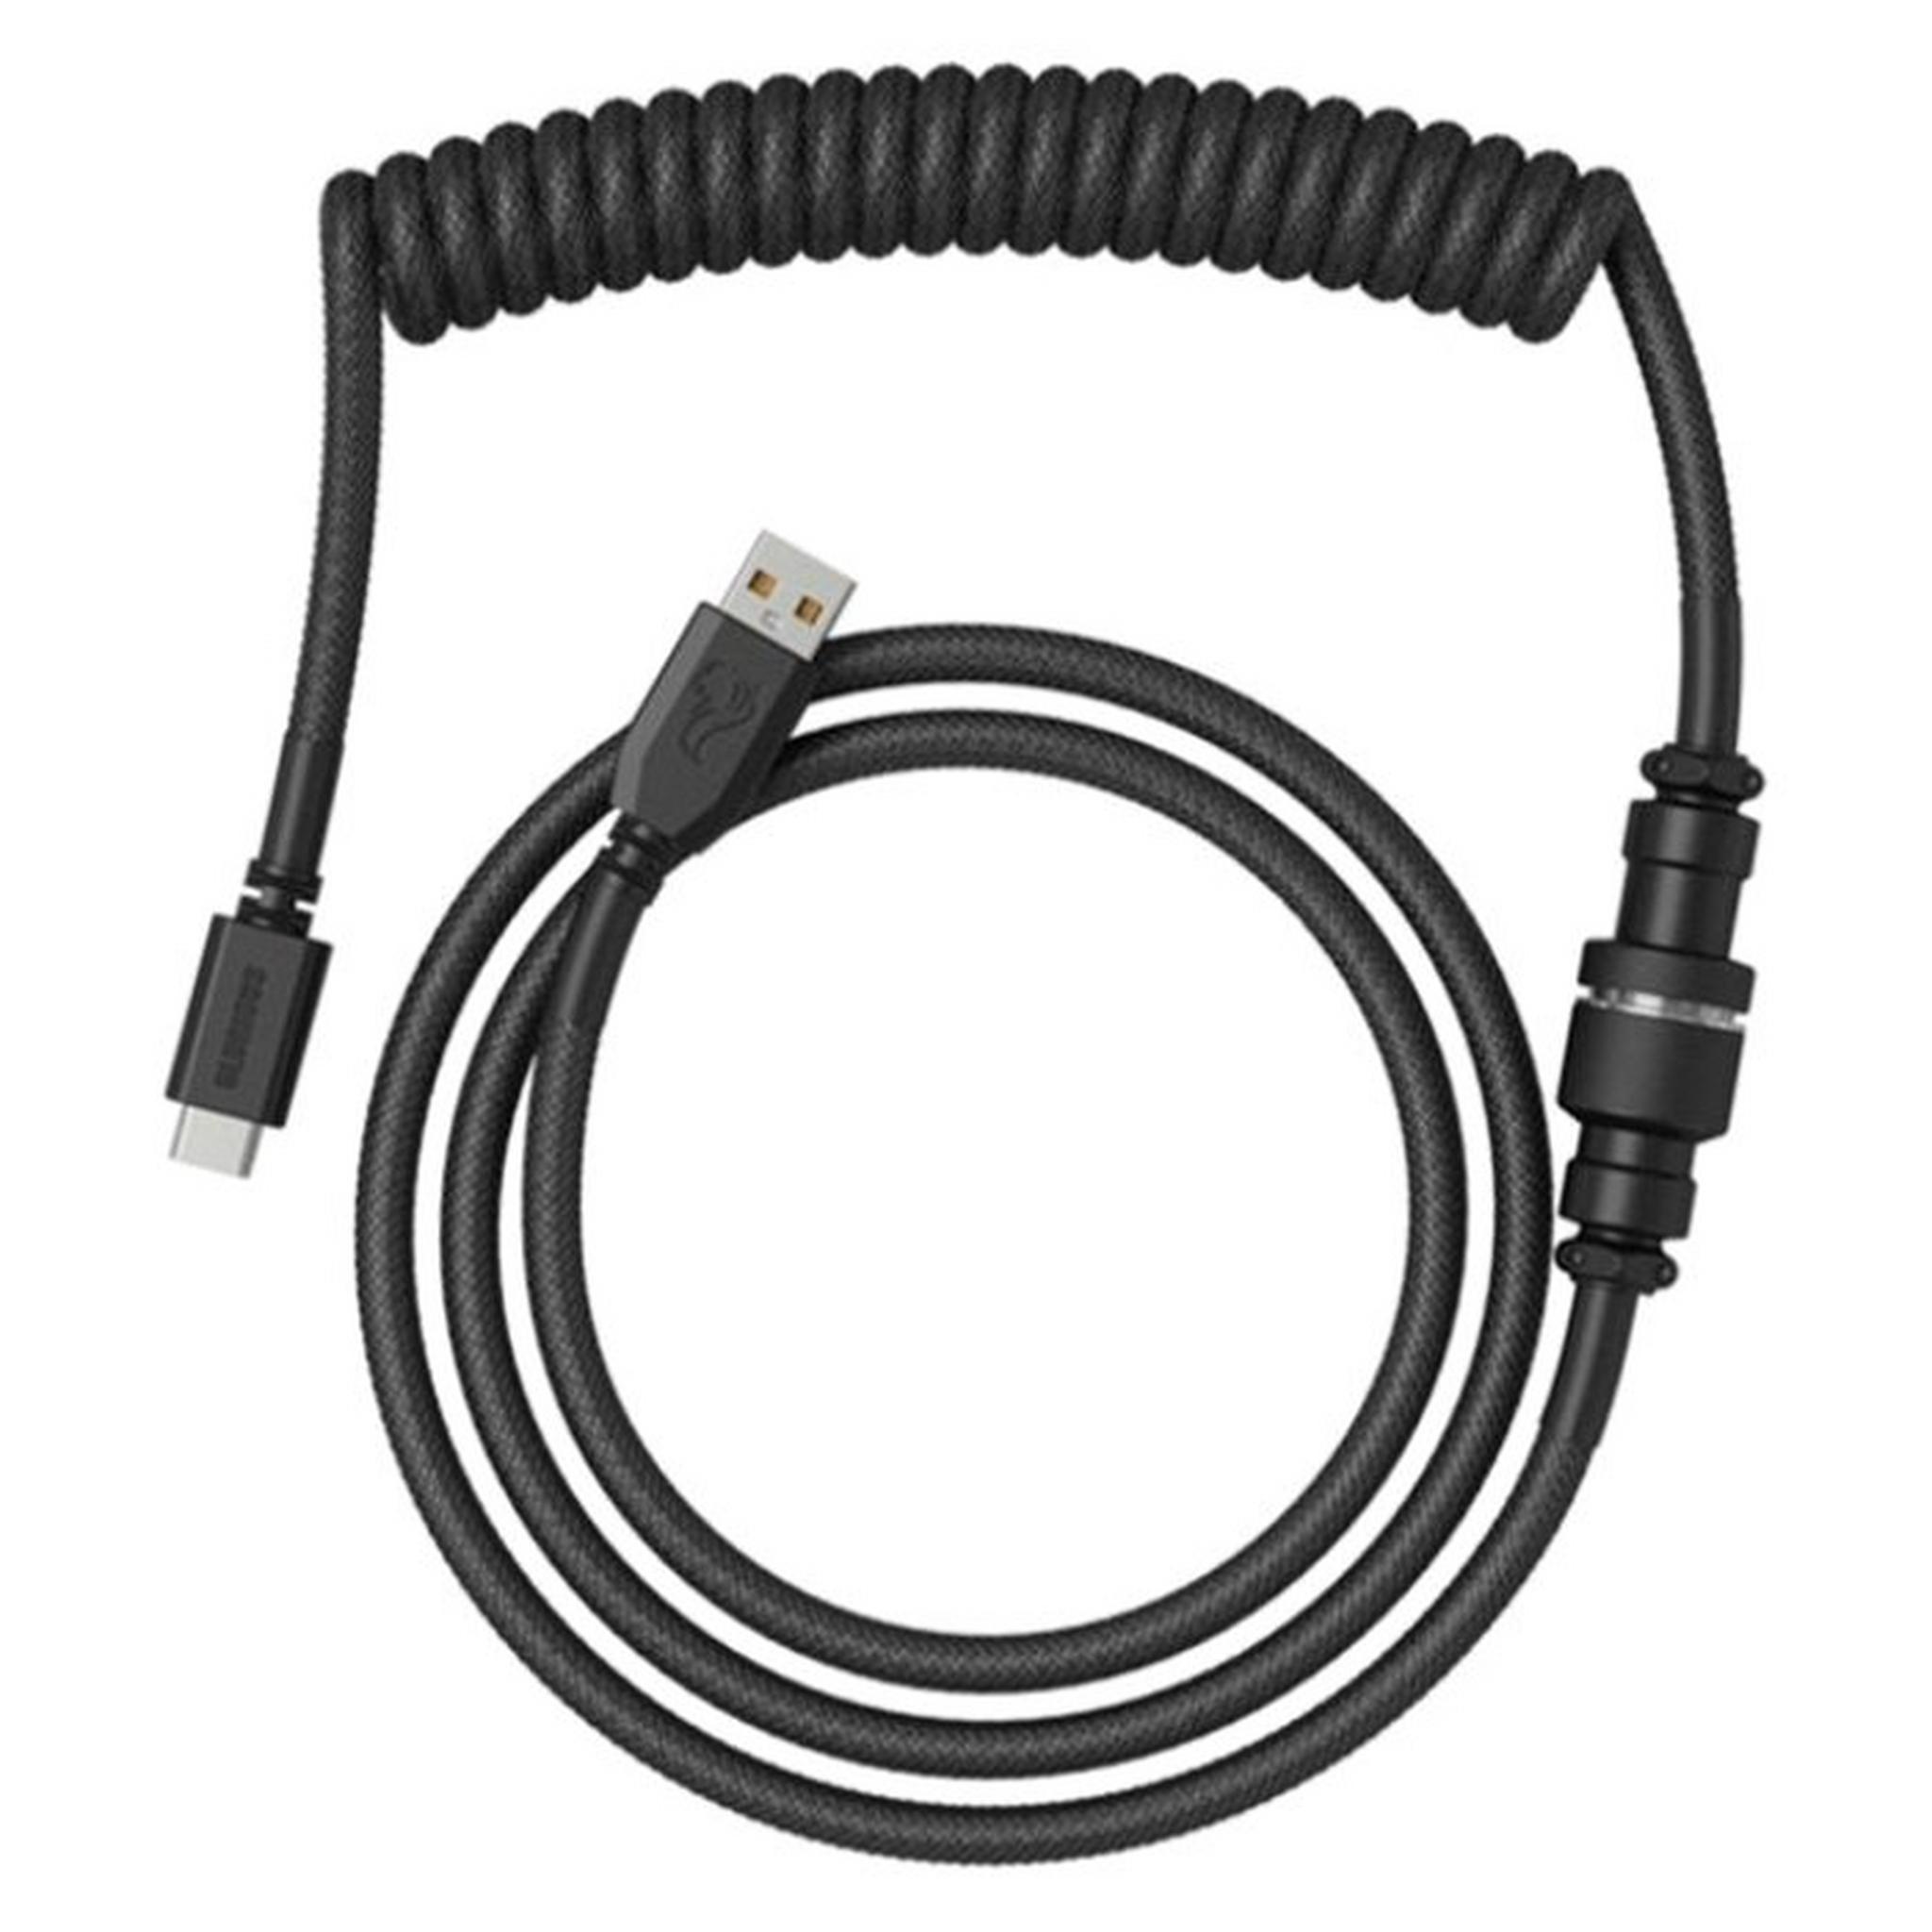 Glorious Coiled 4.5ft Cable for Keyboard - Phantom Black